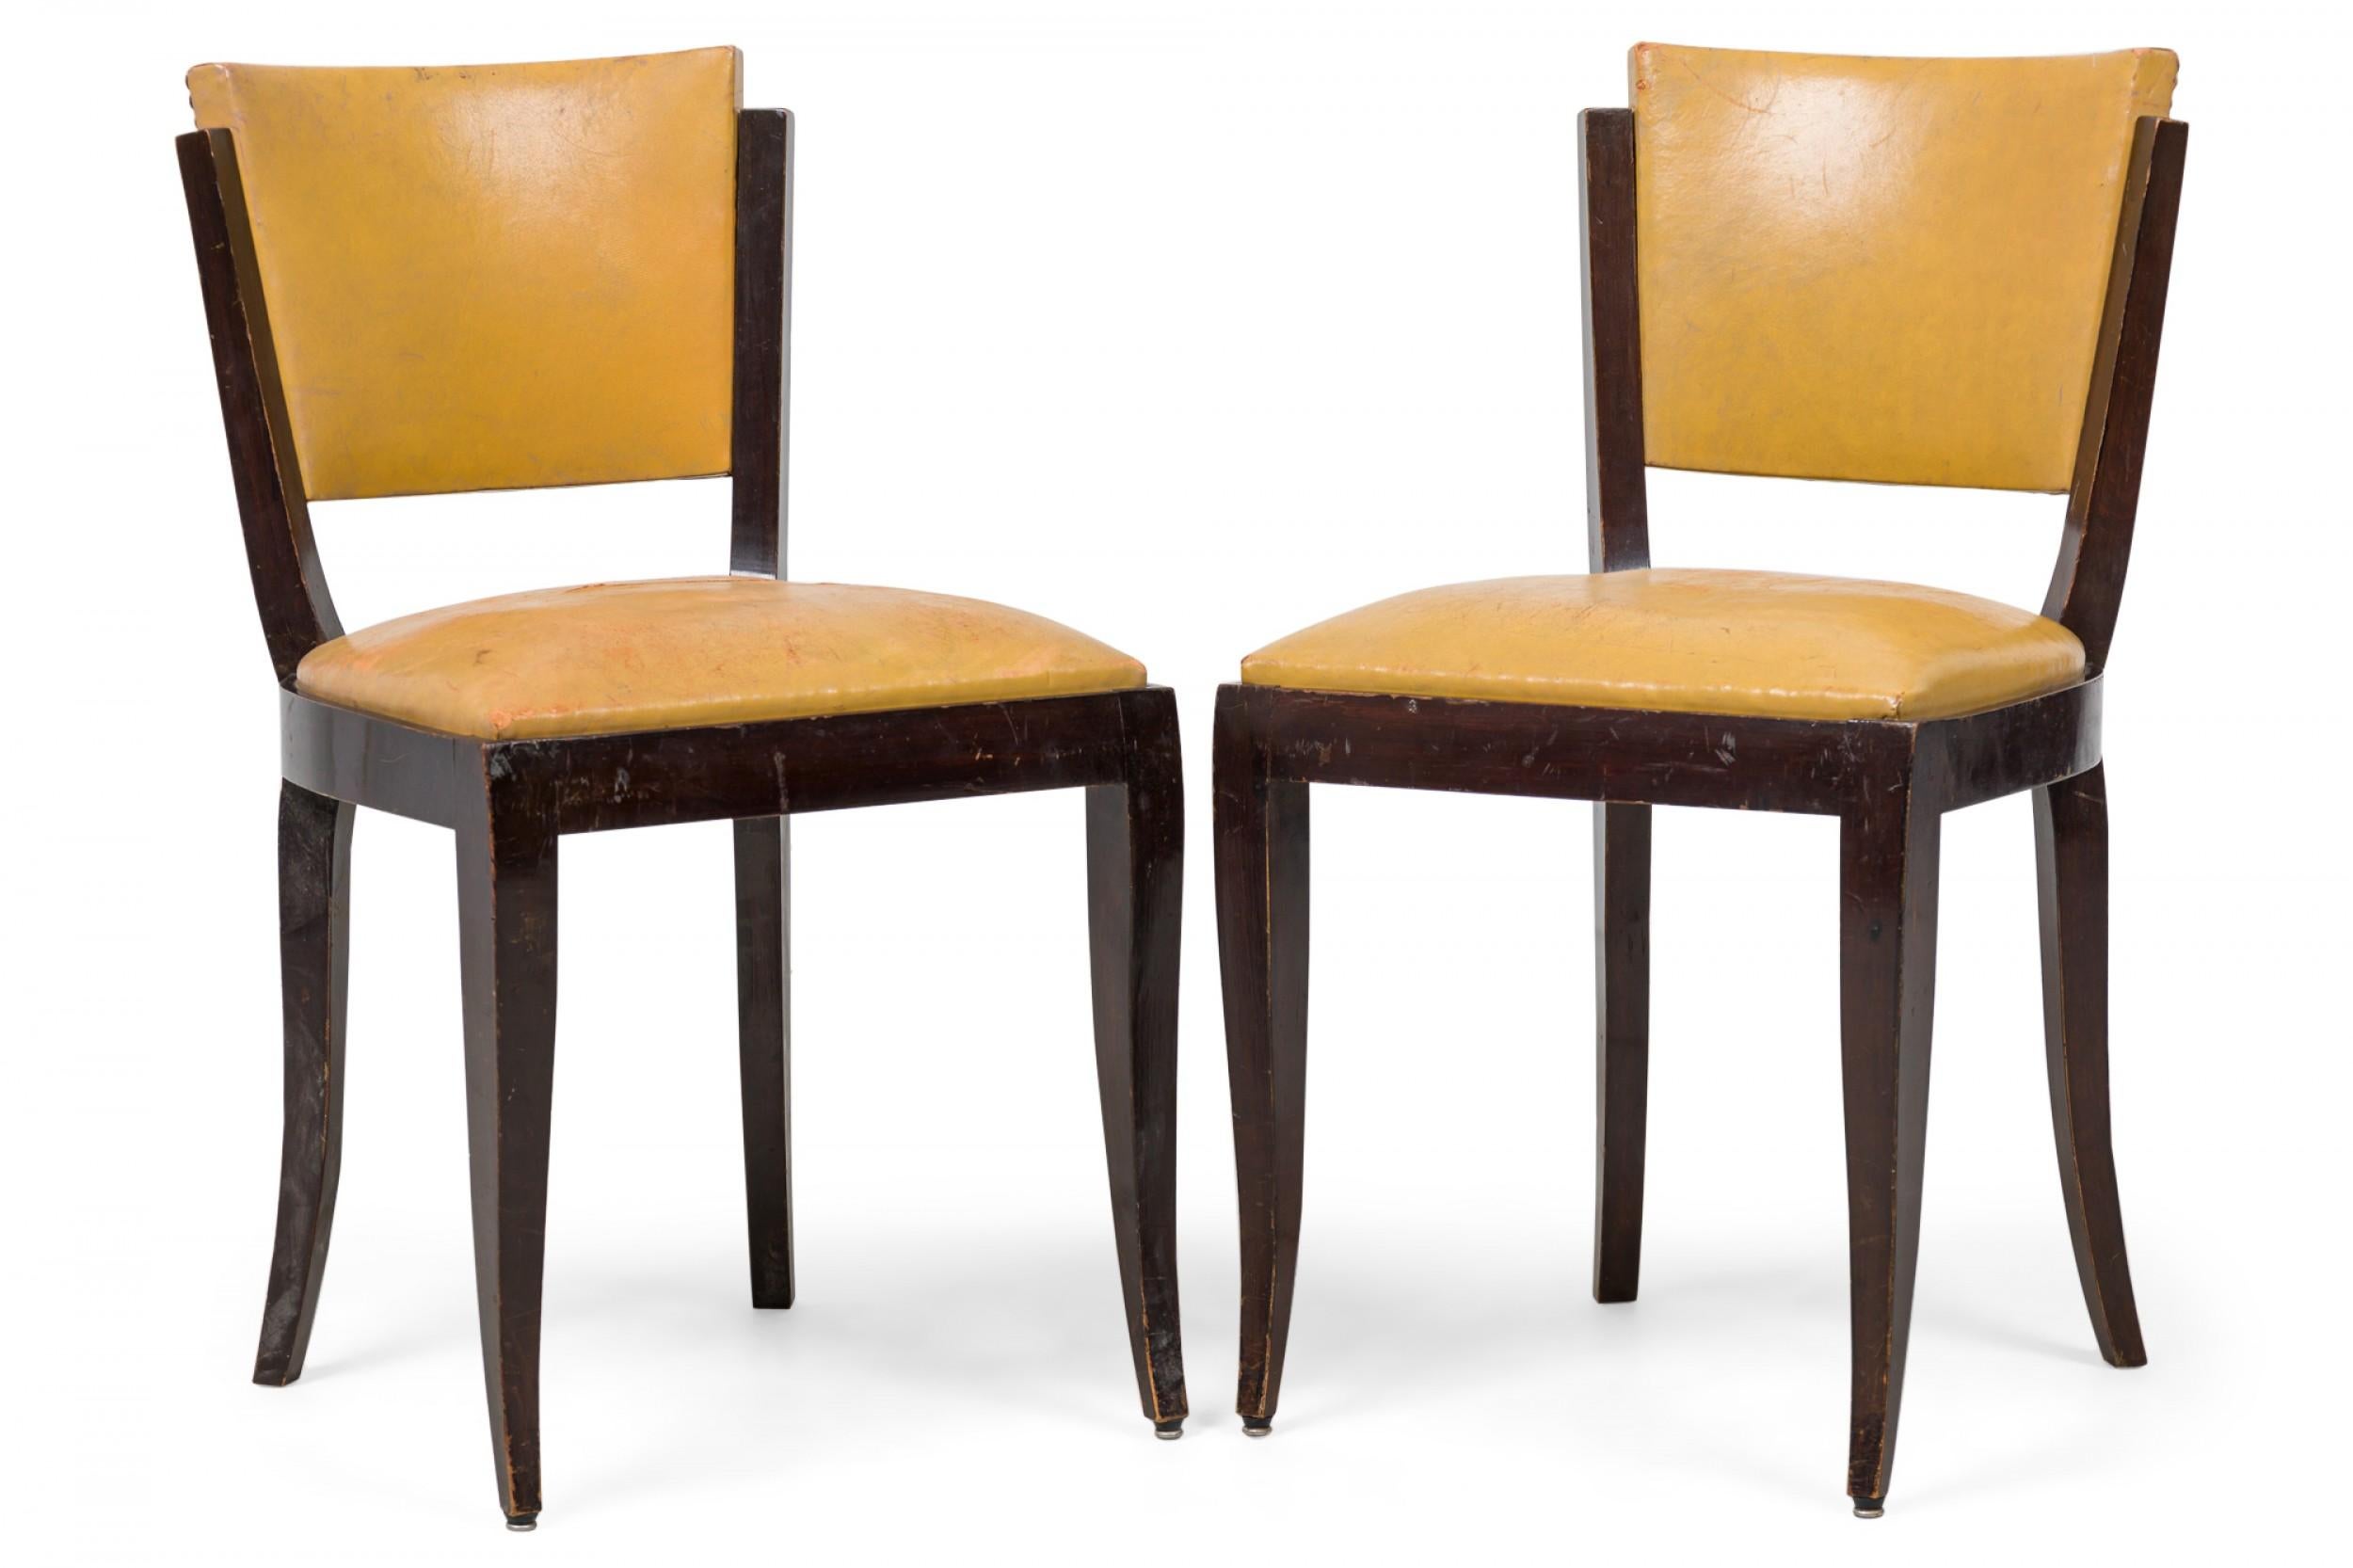 SET of 8 Art Deco American dining / side chairs with a curved trapezoidal backrests and padded seats upholstered in gold vinyl upholstery plus brass nailhead trim, standing on 4 splayed, curved legs. (PRICED AS SET).